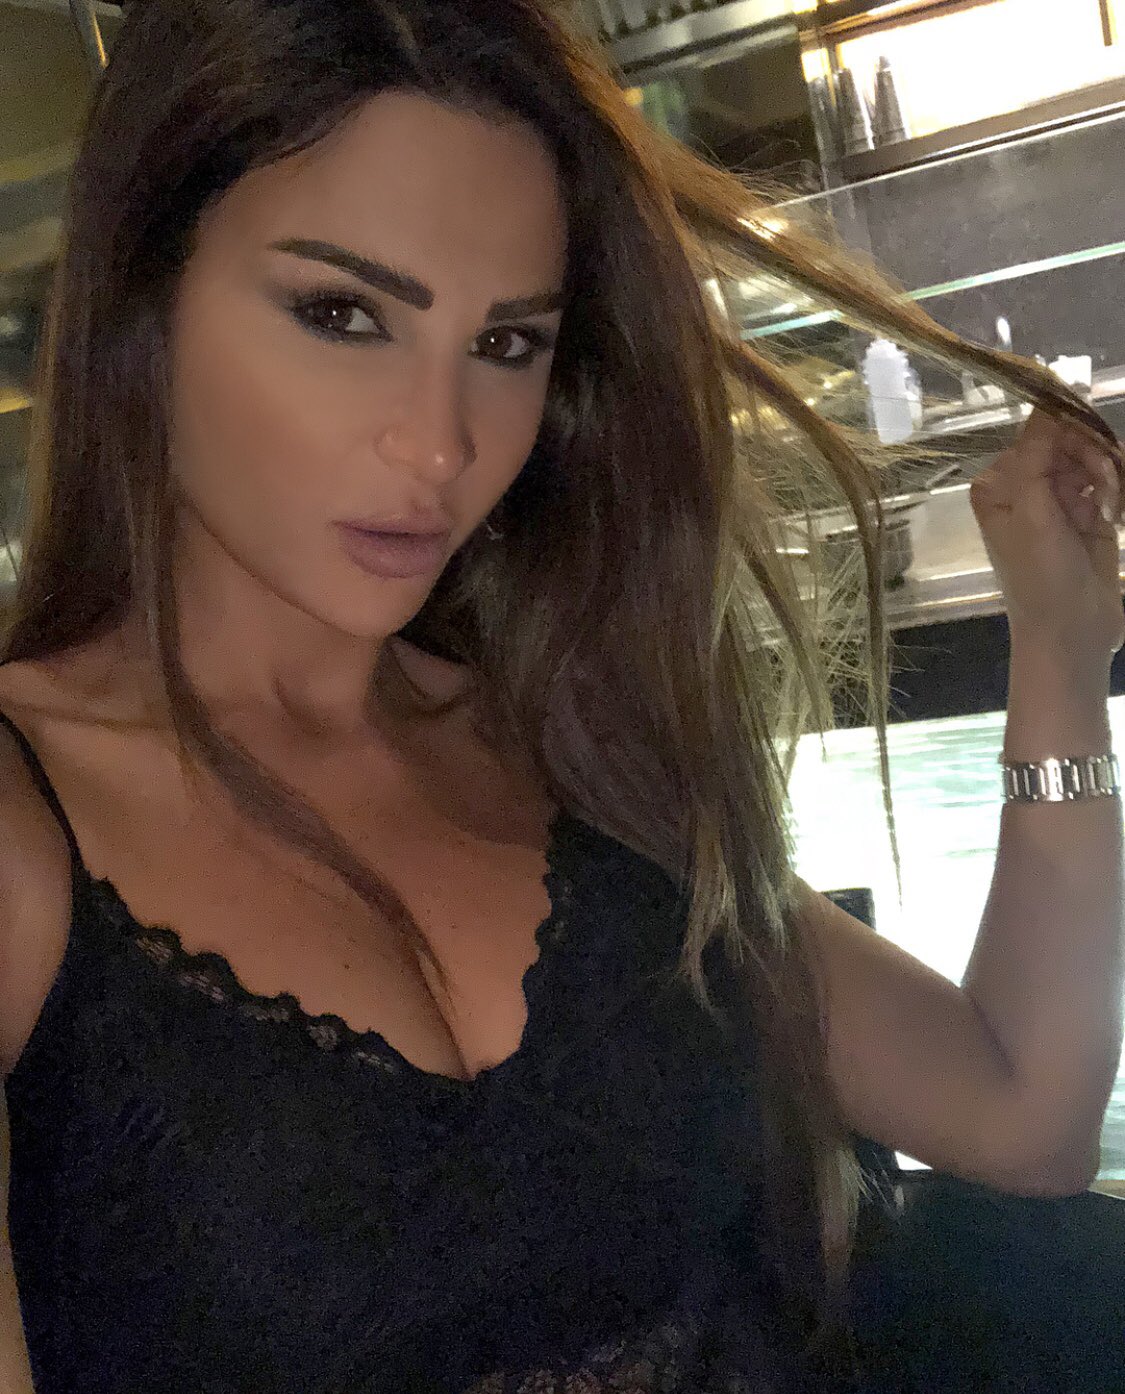 Nelly Makdessy on X: When the shining future worth it never look back for  the blurry past. #نيللي #نيللي_مقدسي #nelly #nelly_makdessy #morning  #sunnyday  / X